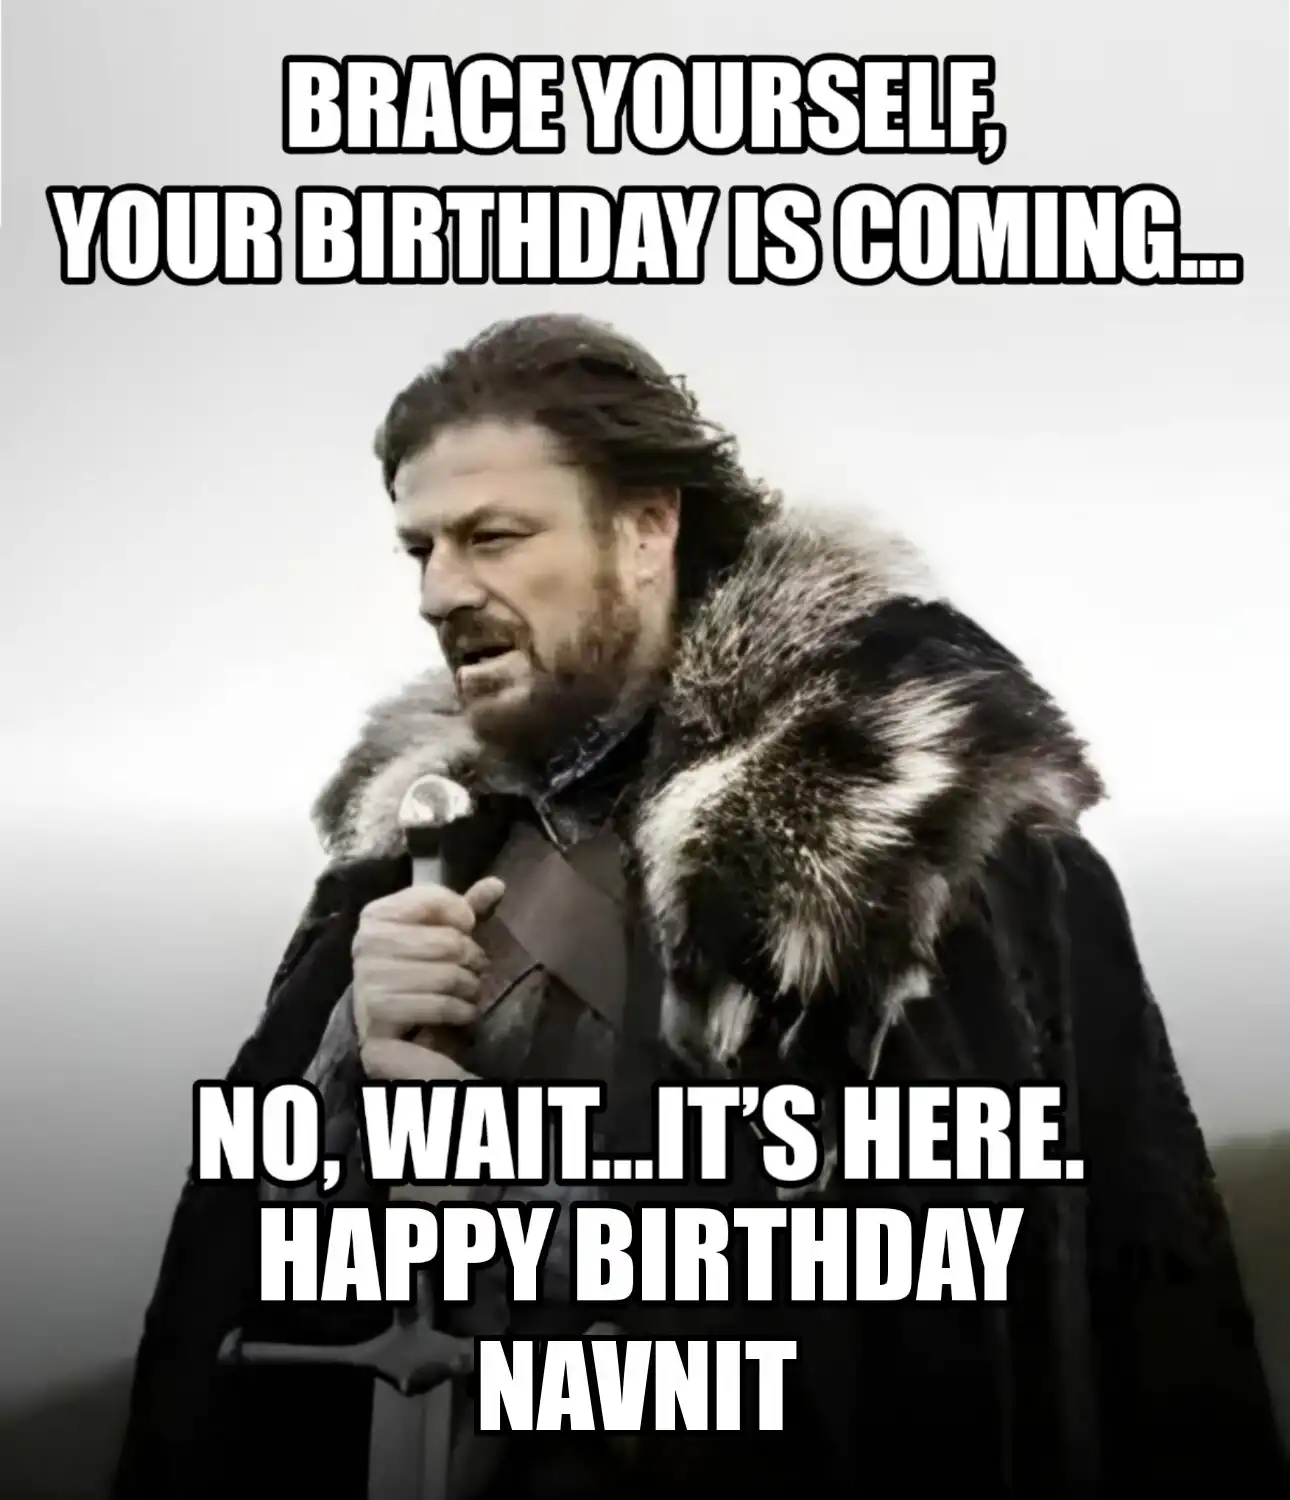 Happy Birthday Navnit Brace Yourself Your Birthday Is Coming Meme